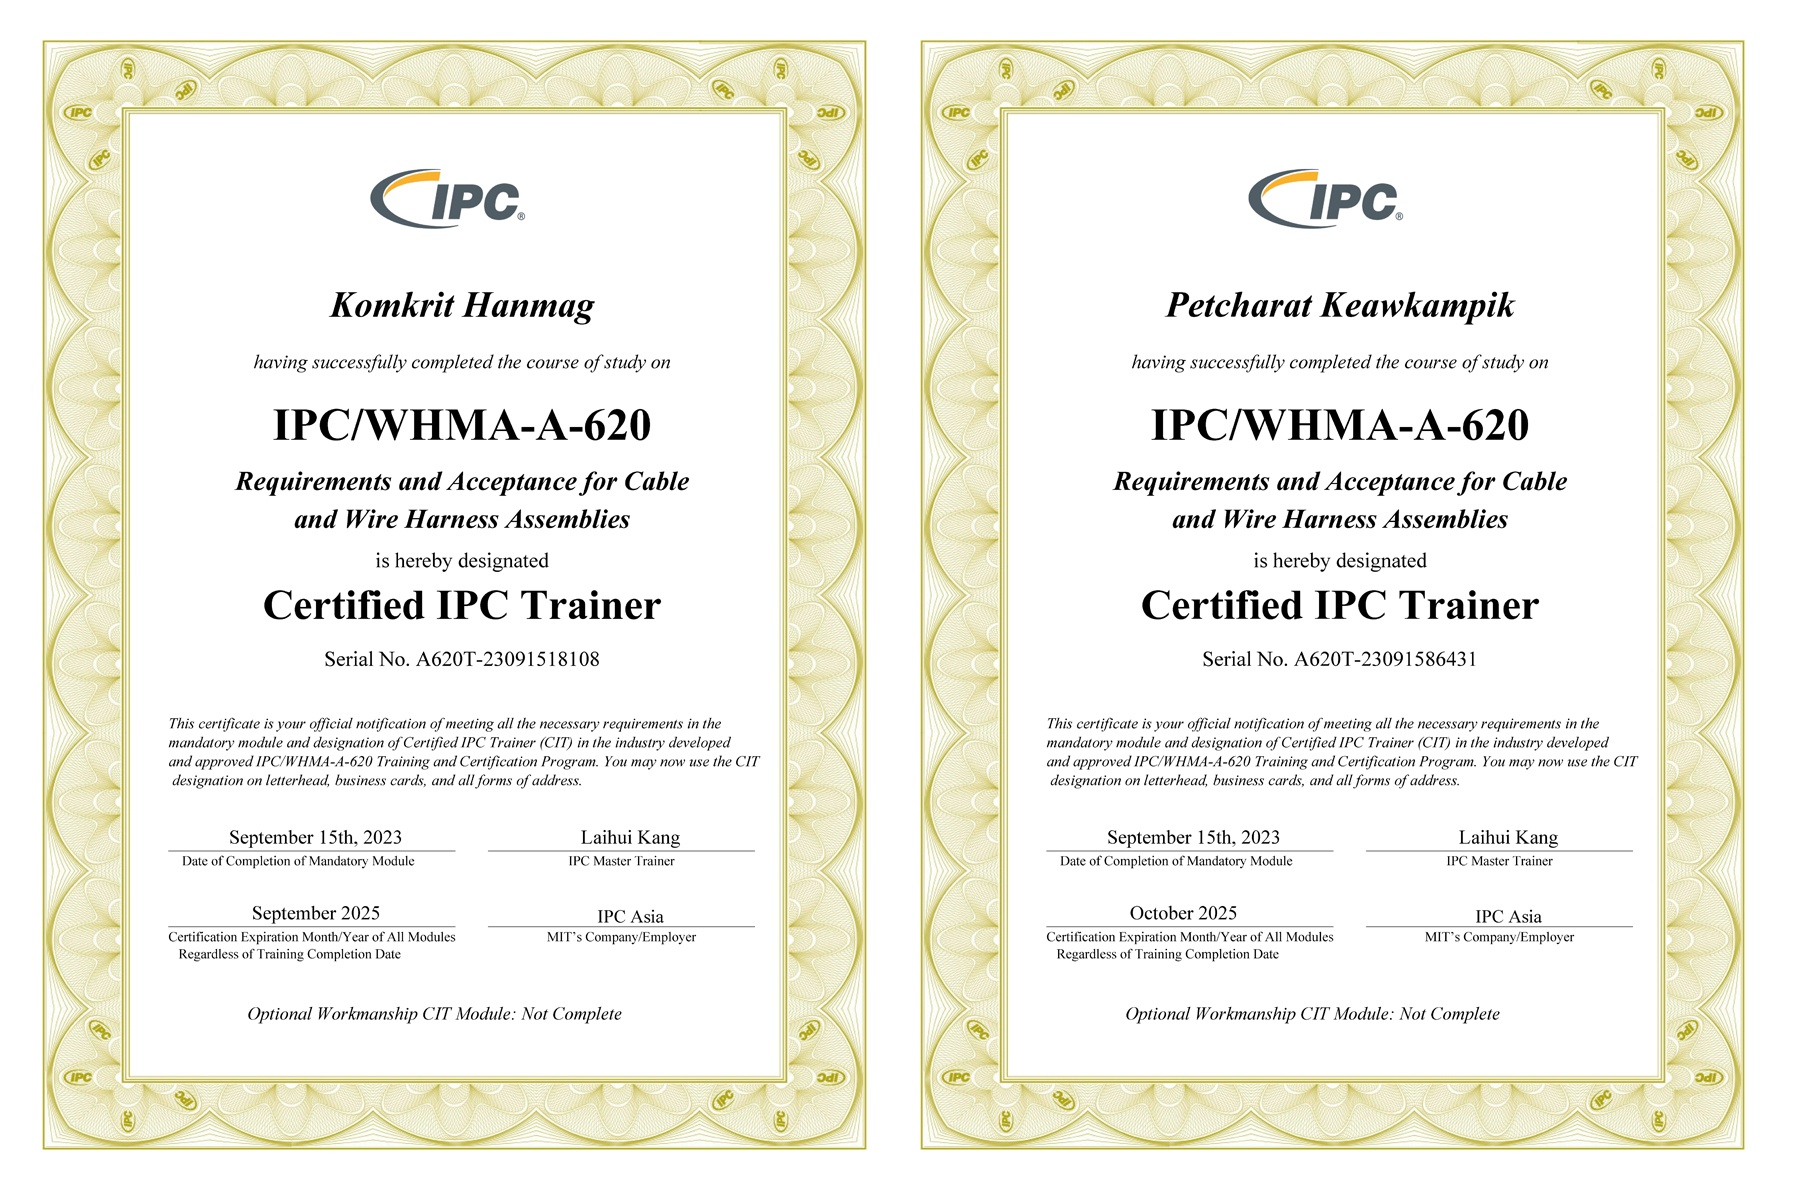 Certificates of Course Completion on Requirements Acceptance for Cable and Wire Harness Assemblies